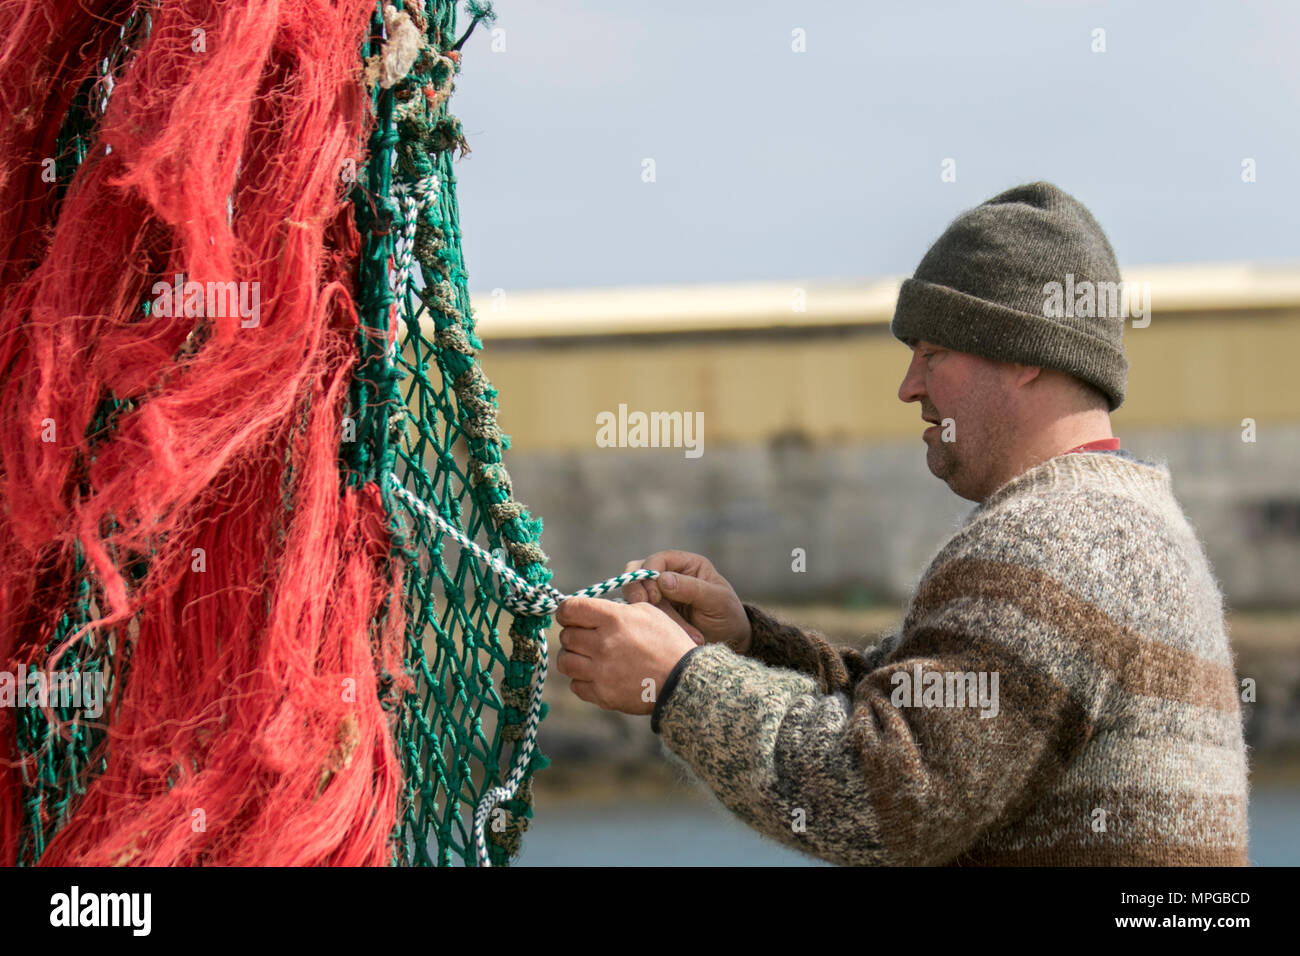 Djupivogur, Iceland. 23rd May, 2018. Weather. Bright sunny start to the day after heavy rain overnight, with clear skies and calm seas. Fisherman take to the high seas to harvest sea cucumber, and cod from the Atlantic oean. Credit: Conrad Elias/Alamy Live News Stock Photo